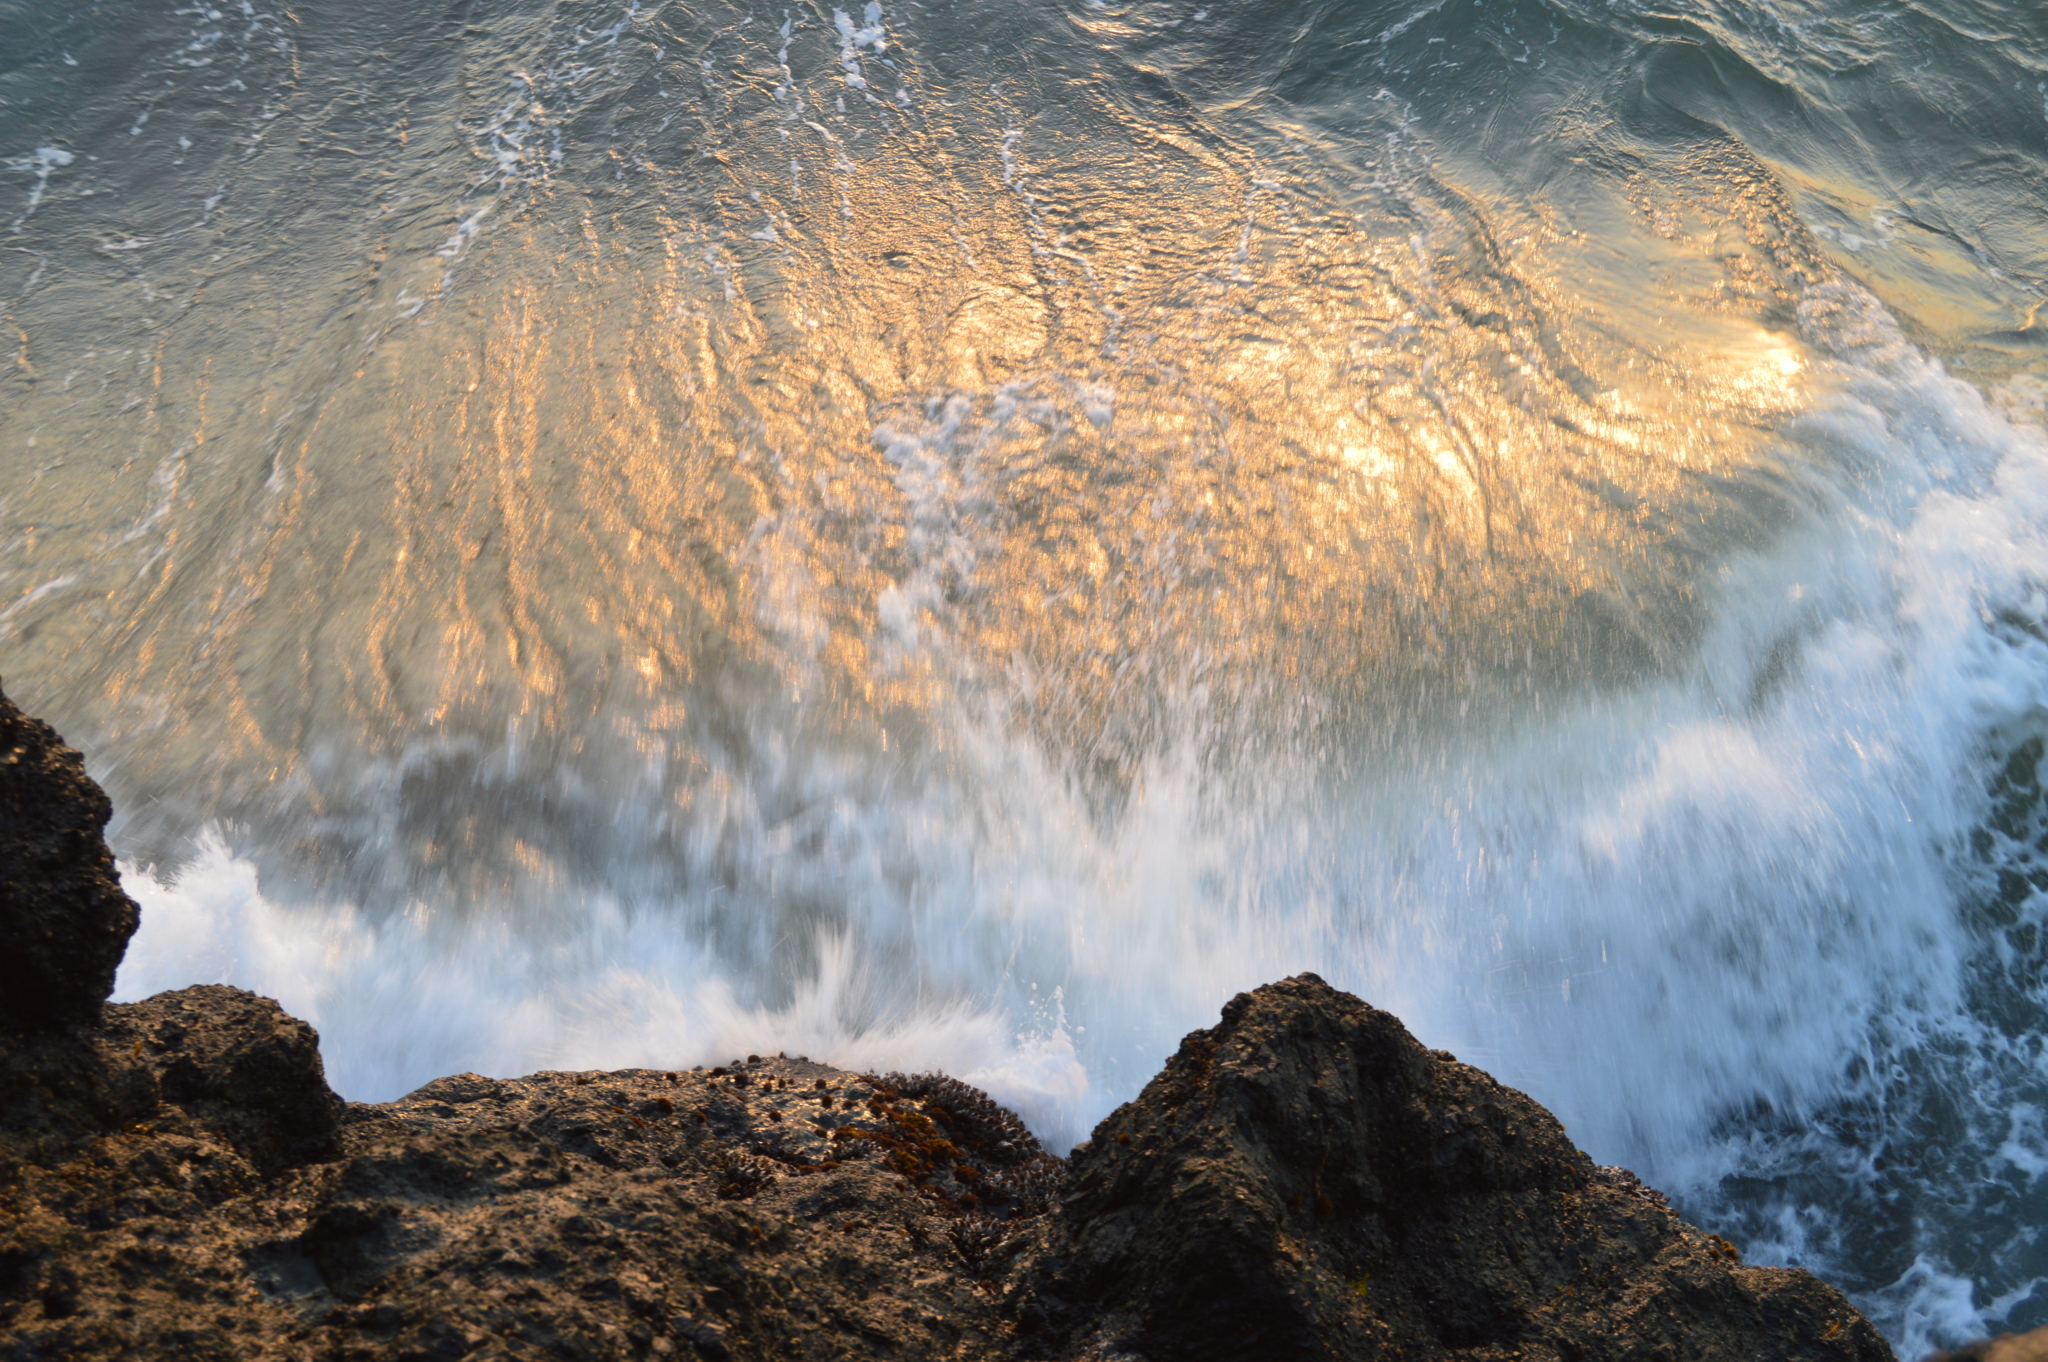 Ocean water with sunlight shining onto it crashing into rocky shore